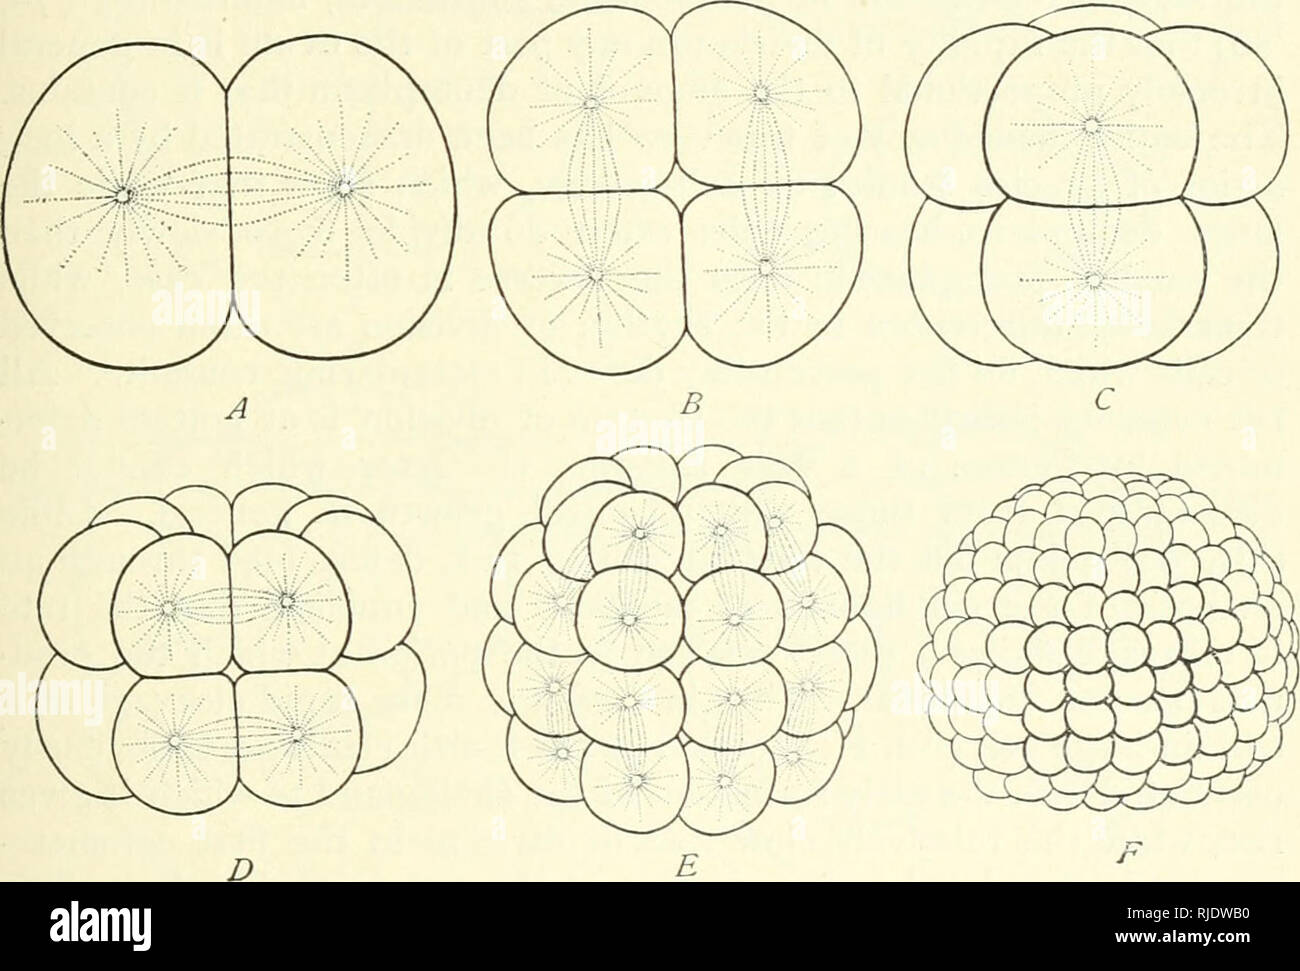 . The cell in development and inheritance. Cells. GEOMETRICAL RELATIONS OF CLEAVAGE-FORMS 565 planes according to Sachs's second rule. The first division of a homo- geneous spherical Qg%, for example, is followed by a second division at right angles to it, since each hemisphere is twice as long in the plane of division as in any plane vertical to it. The mitotic figure of the second division lies therefore parallel to the first plane, which forms the base of the hemisphere, and the ensuing division is vertical to it. The same applies to the third division, since each quadrant is as long as the Stock Photo